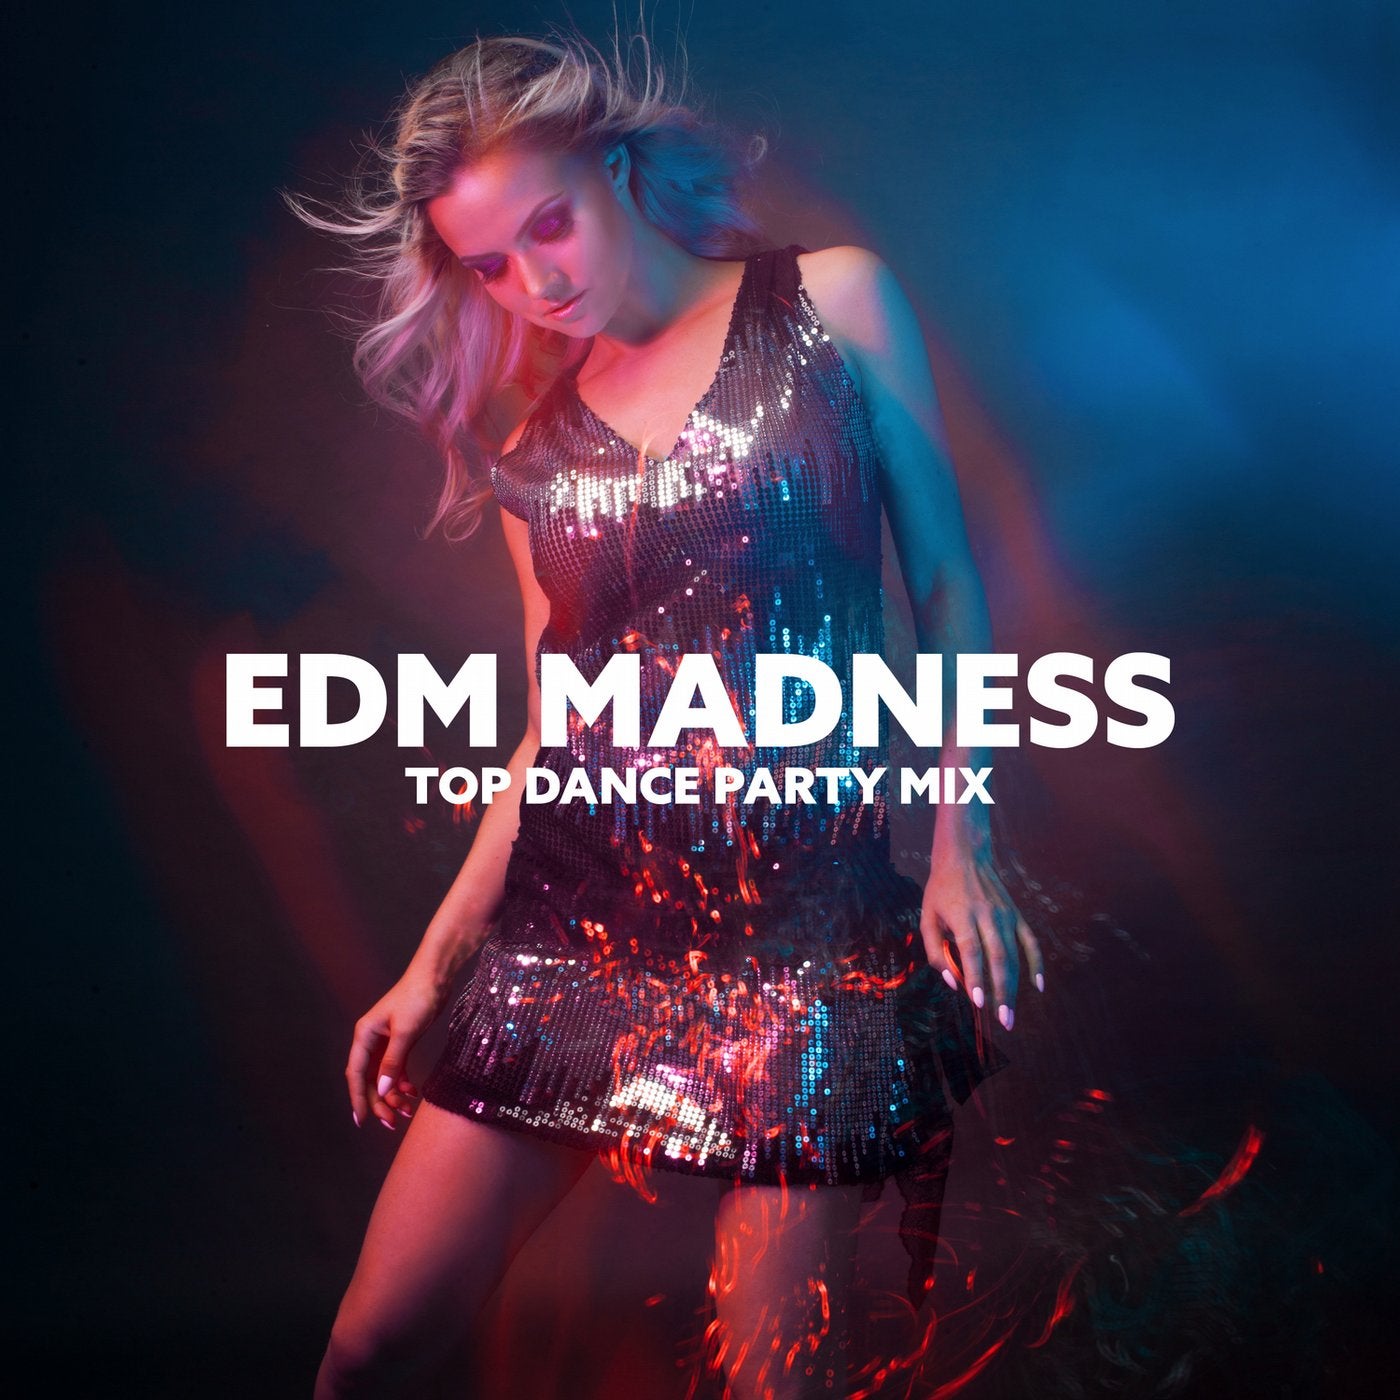 EDM Madness: Top Dance Party Mix